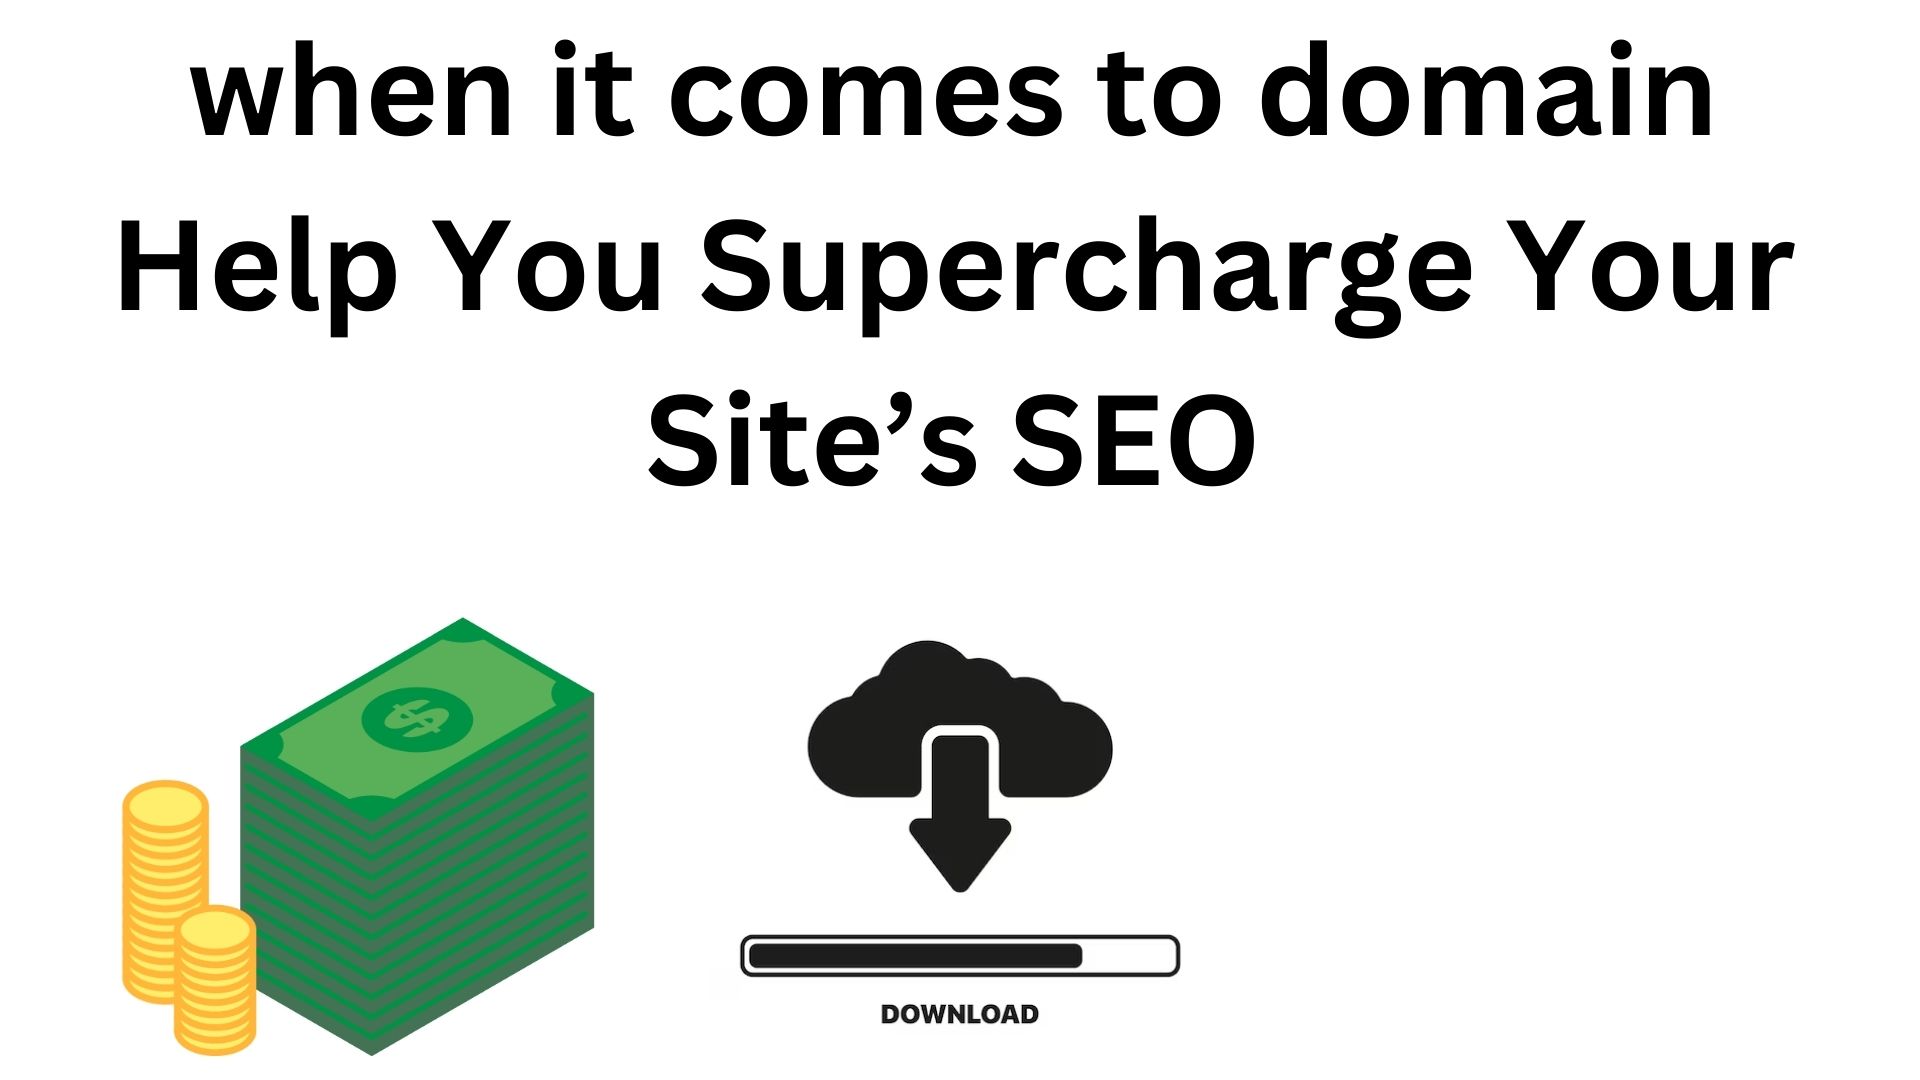 When It Comes To Domain Help You Supercharge Your Site’s Seo